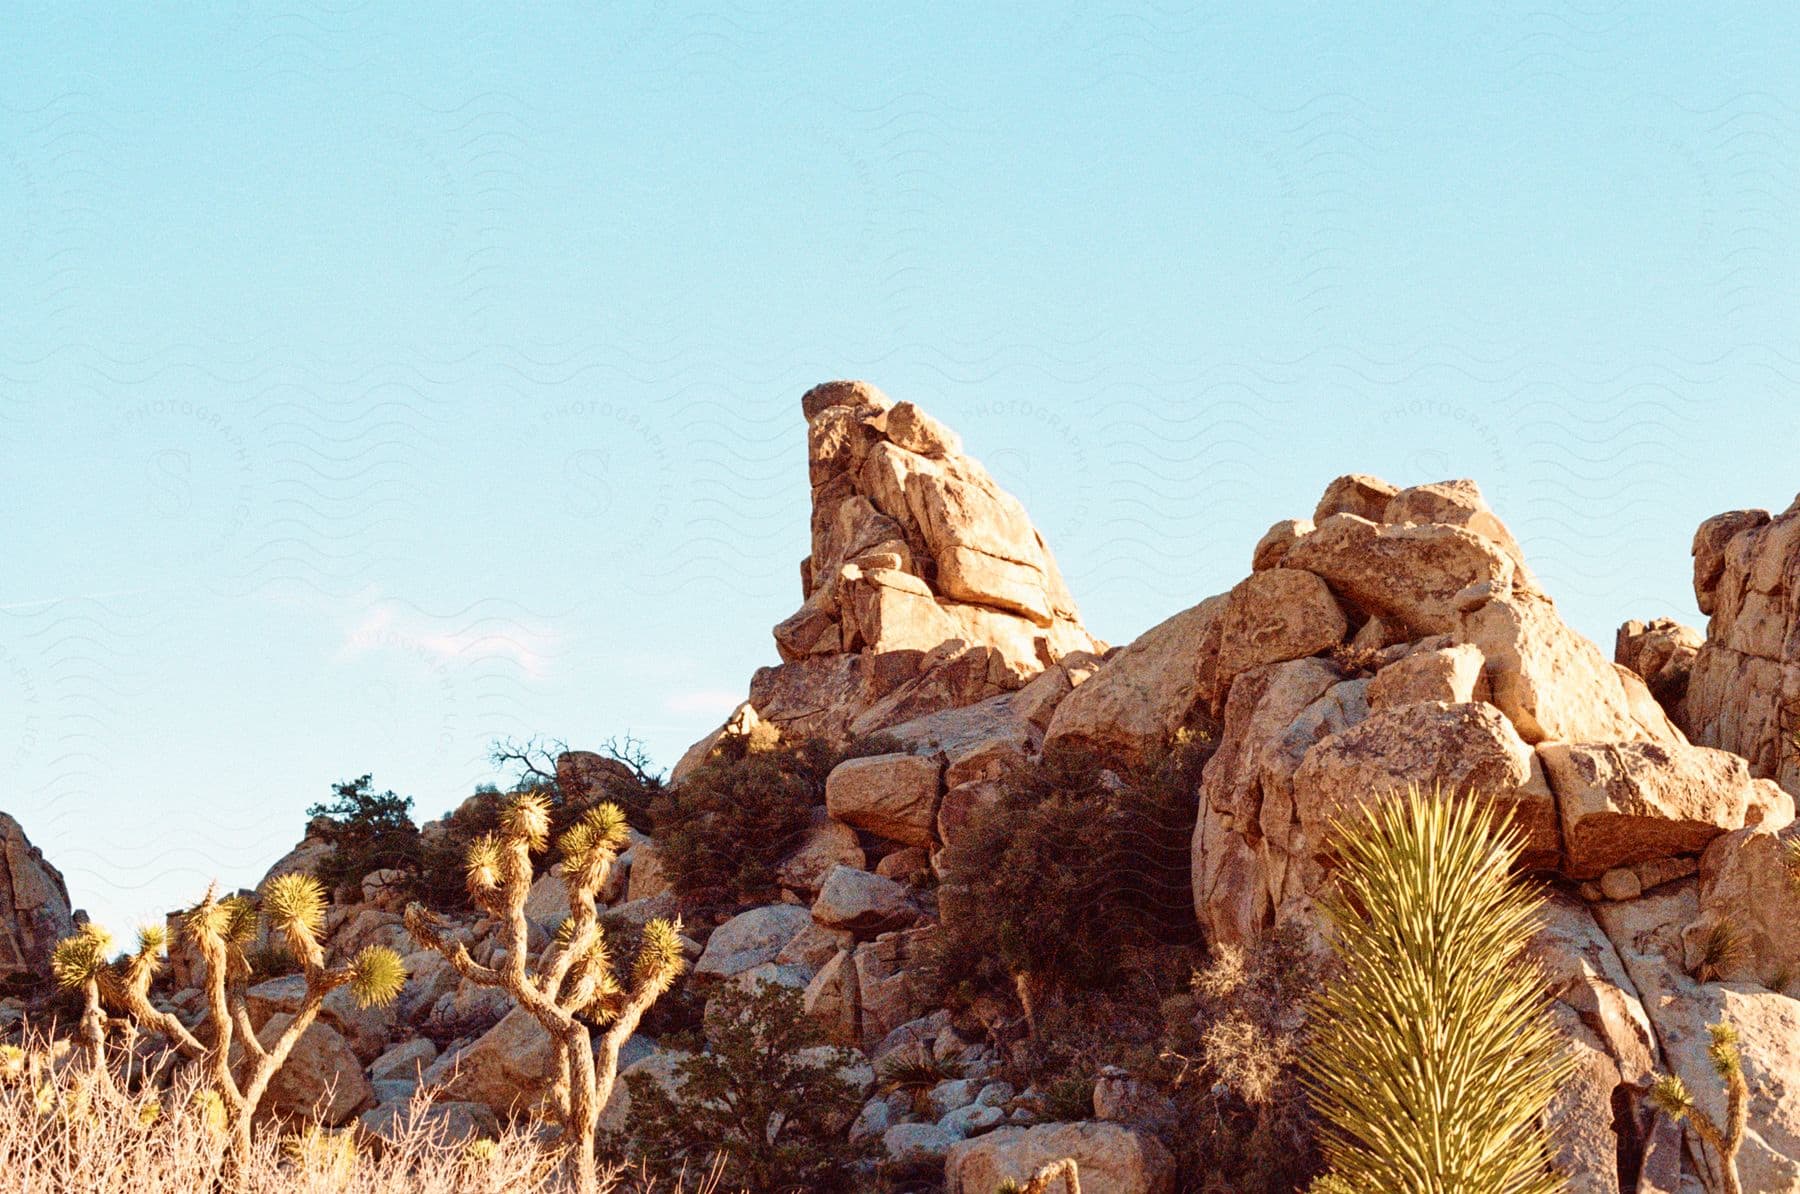 A landscape of rock formations with various plants under a clear sky during a sunny day.